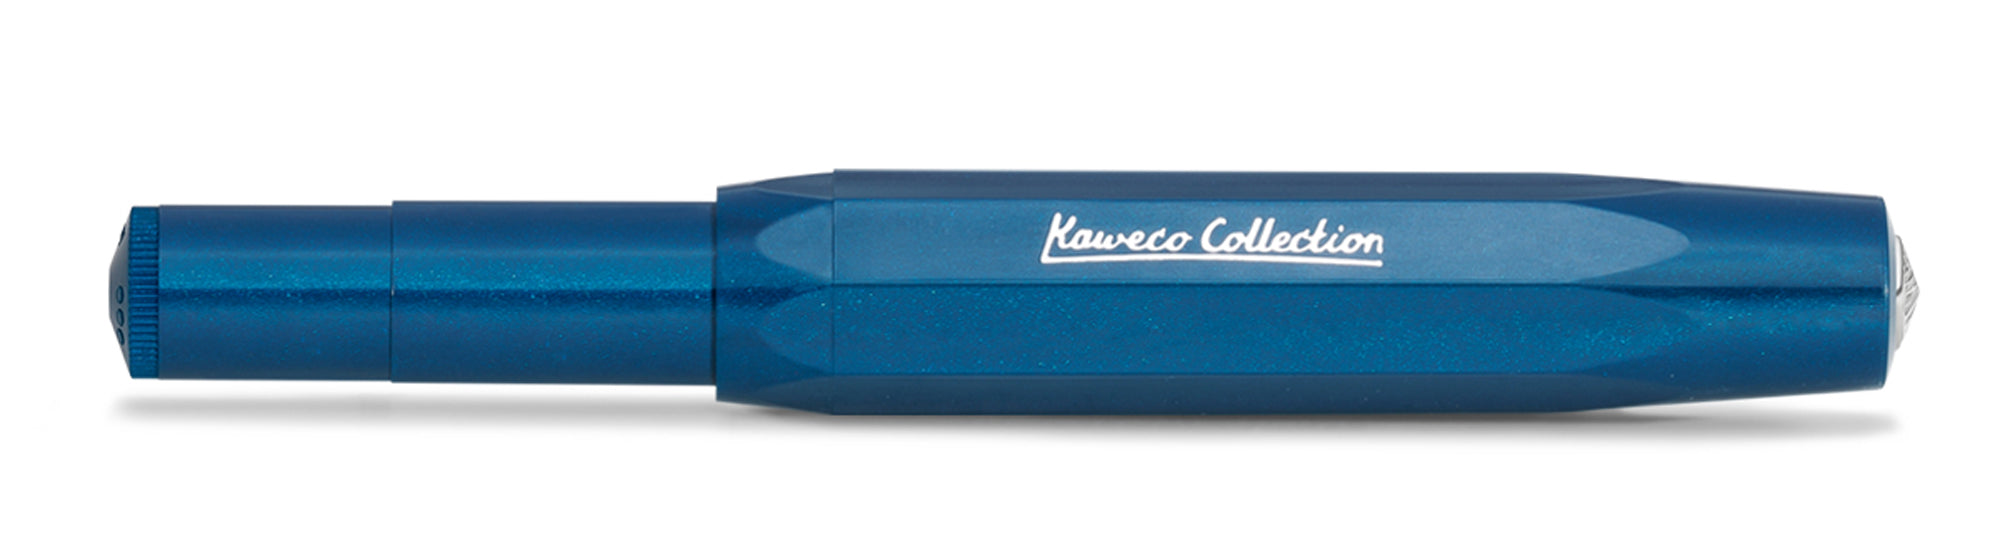 Kaweco - Collection Toyoma Teal - Vulpen - Limited Edition-Vulpen-DutchMills